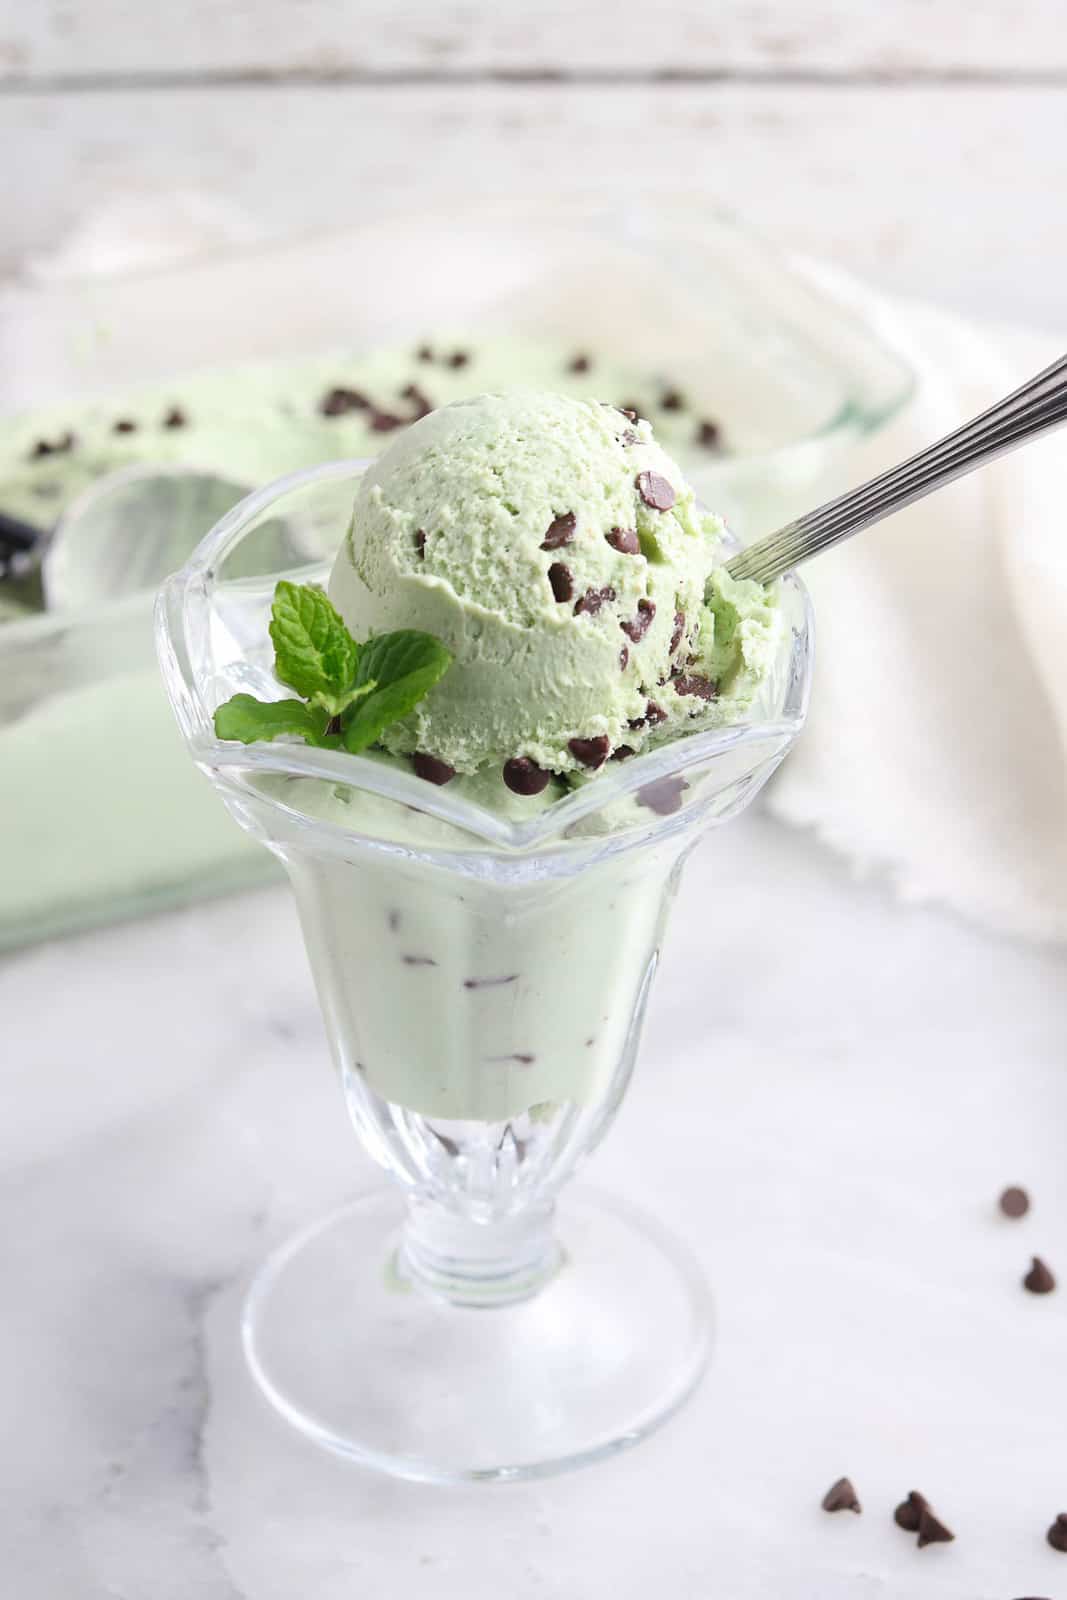 vegan mint chip ice cream in a clear ice cream glass with sprig of mint for garnish